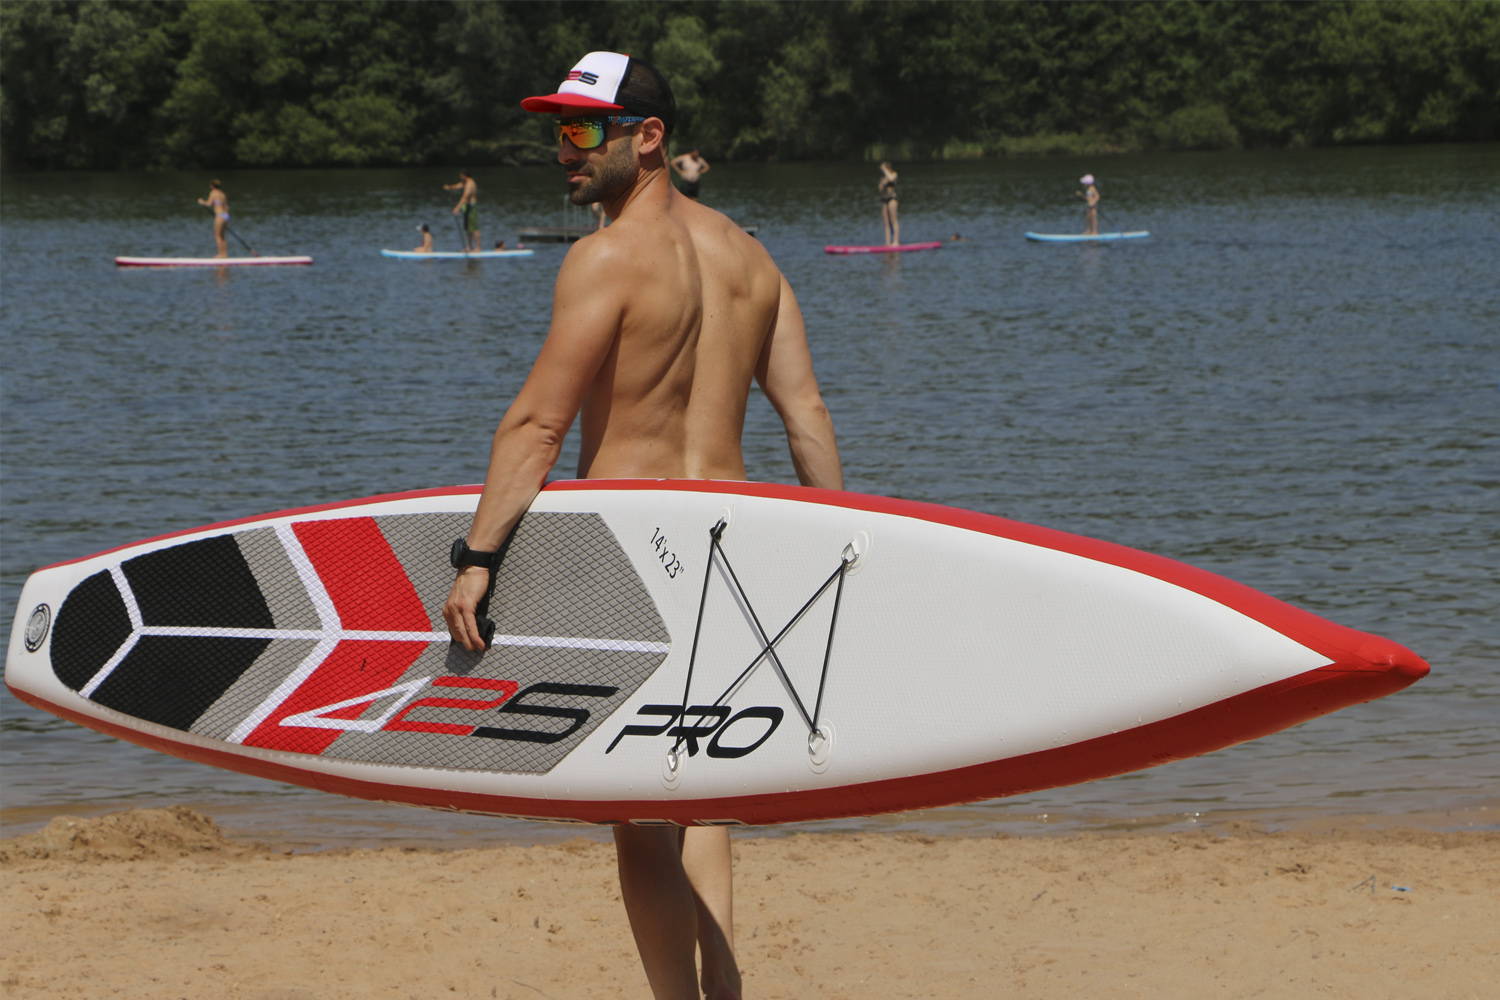 425 pro Air Sup Board: A man carrying the board 